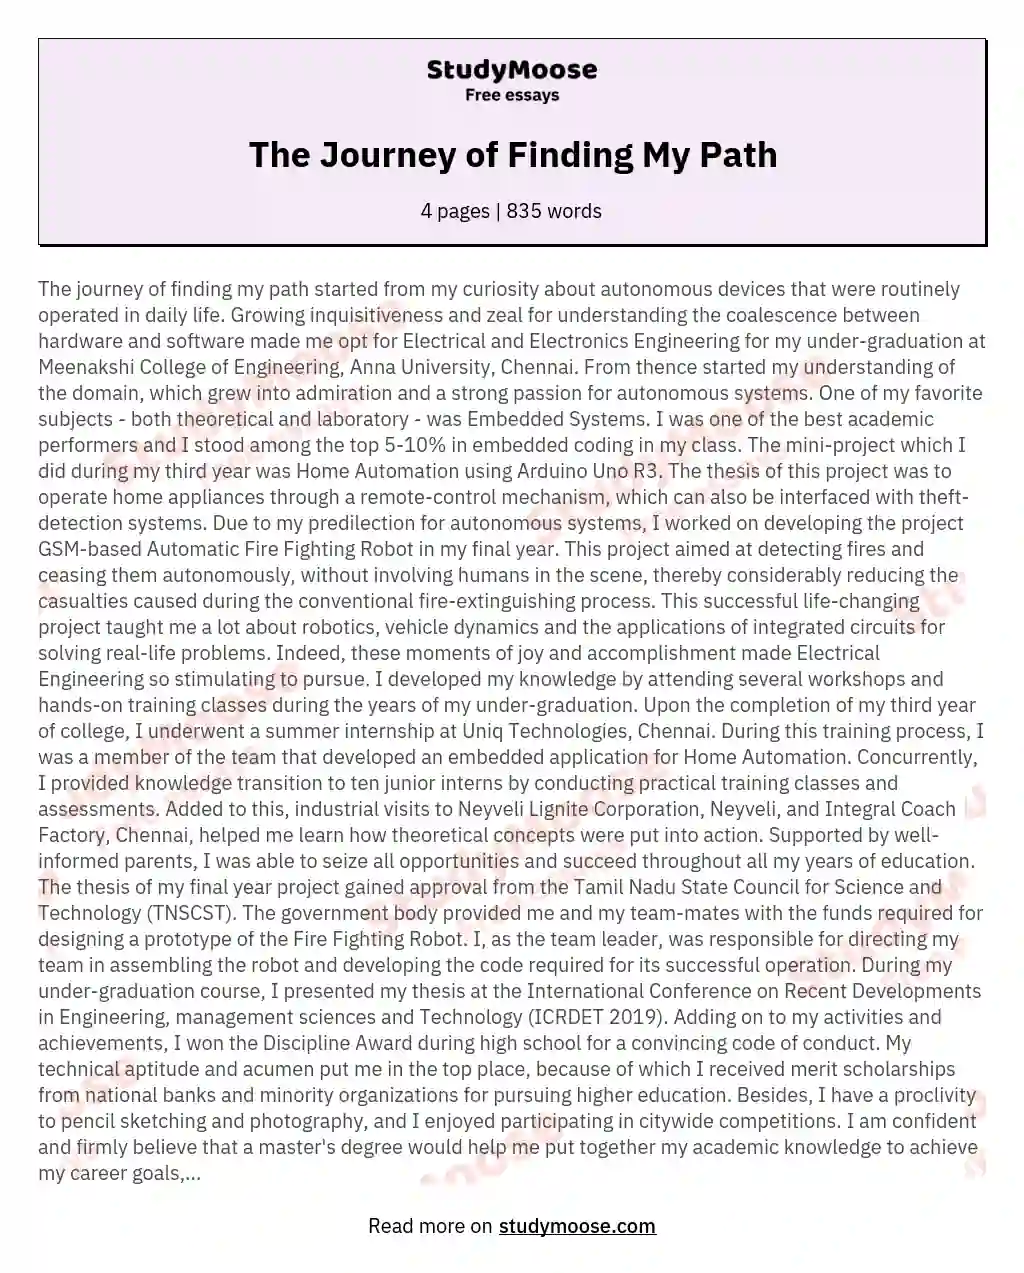 The Journey of Finding My Path essay